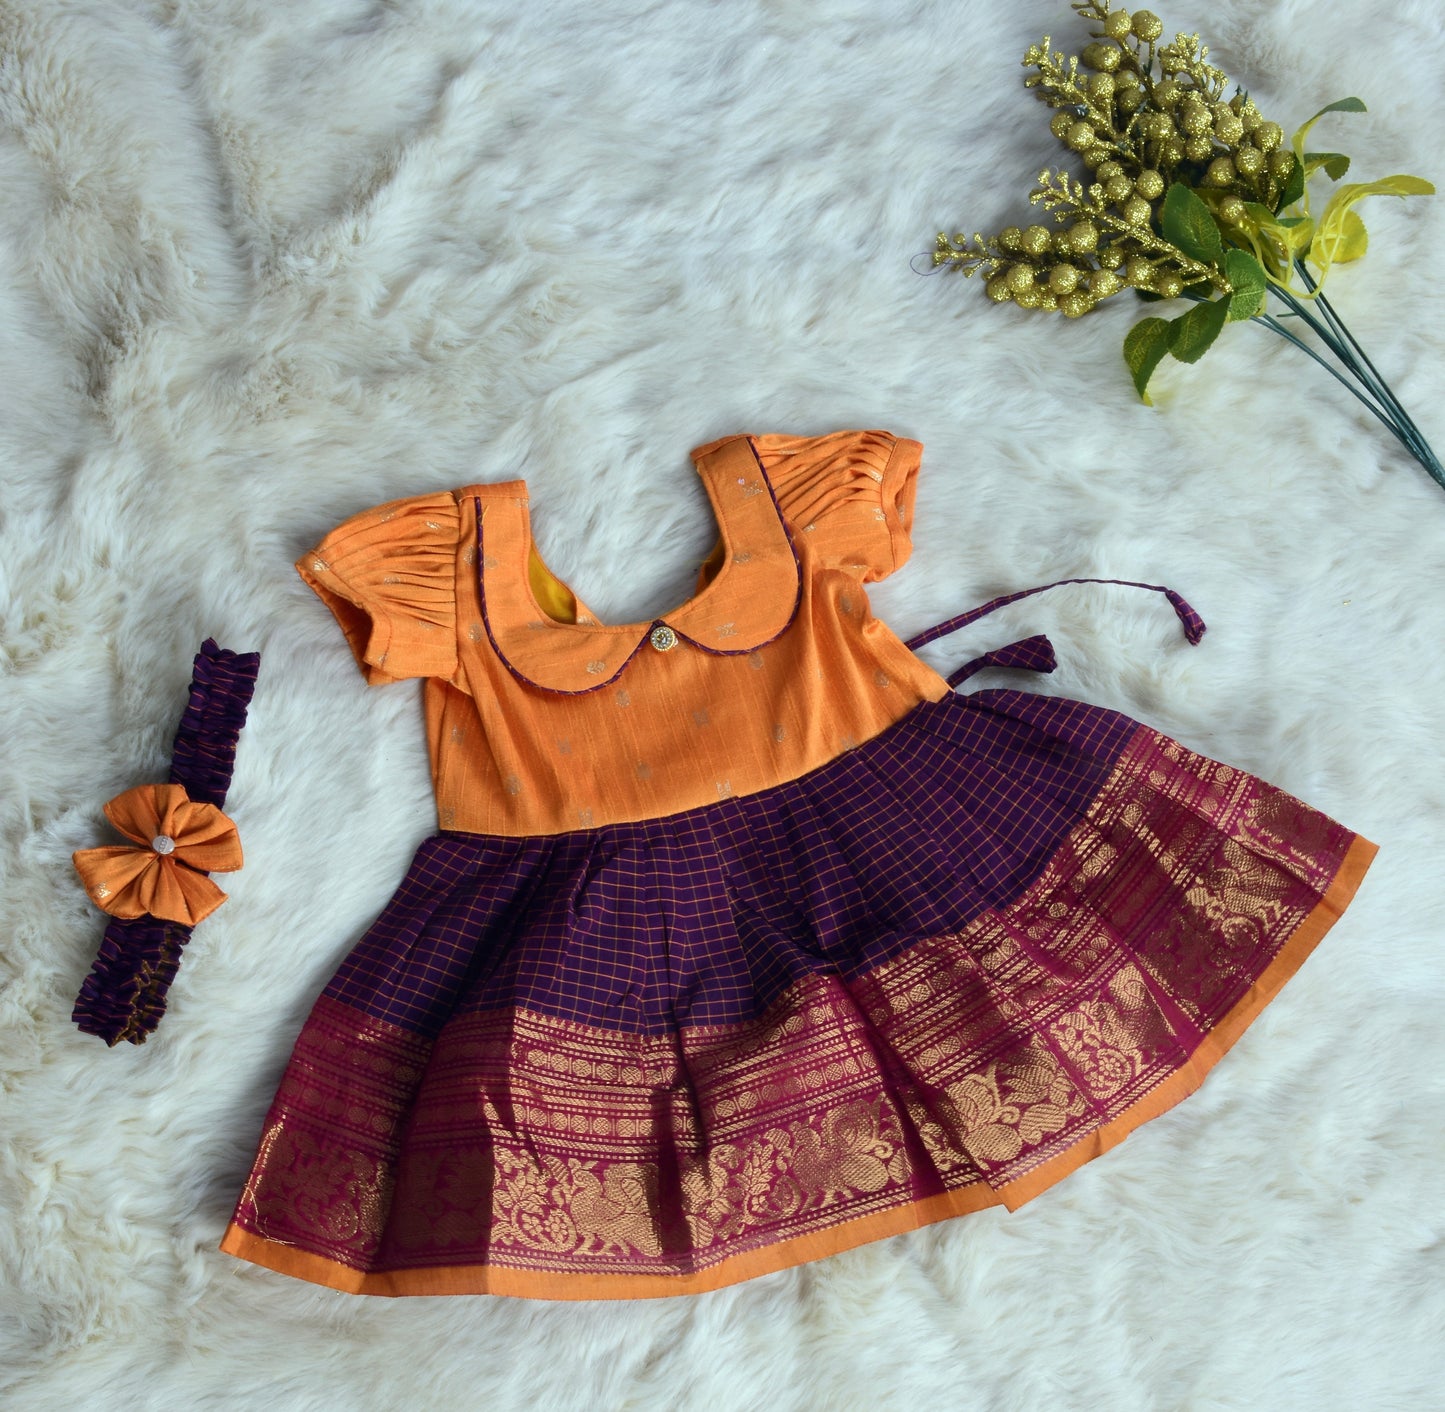 Saffron Yellow and checked purple (Vintage Collar) - Kanchi Cotton Silk South Indian Ethnic Frock for Baby Girl